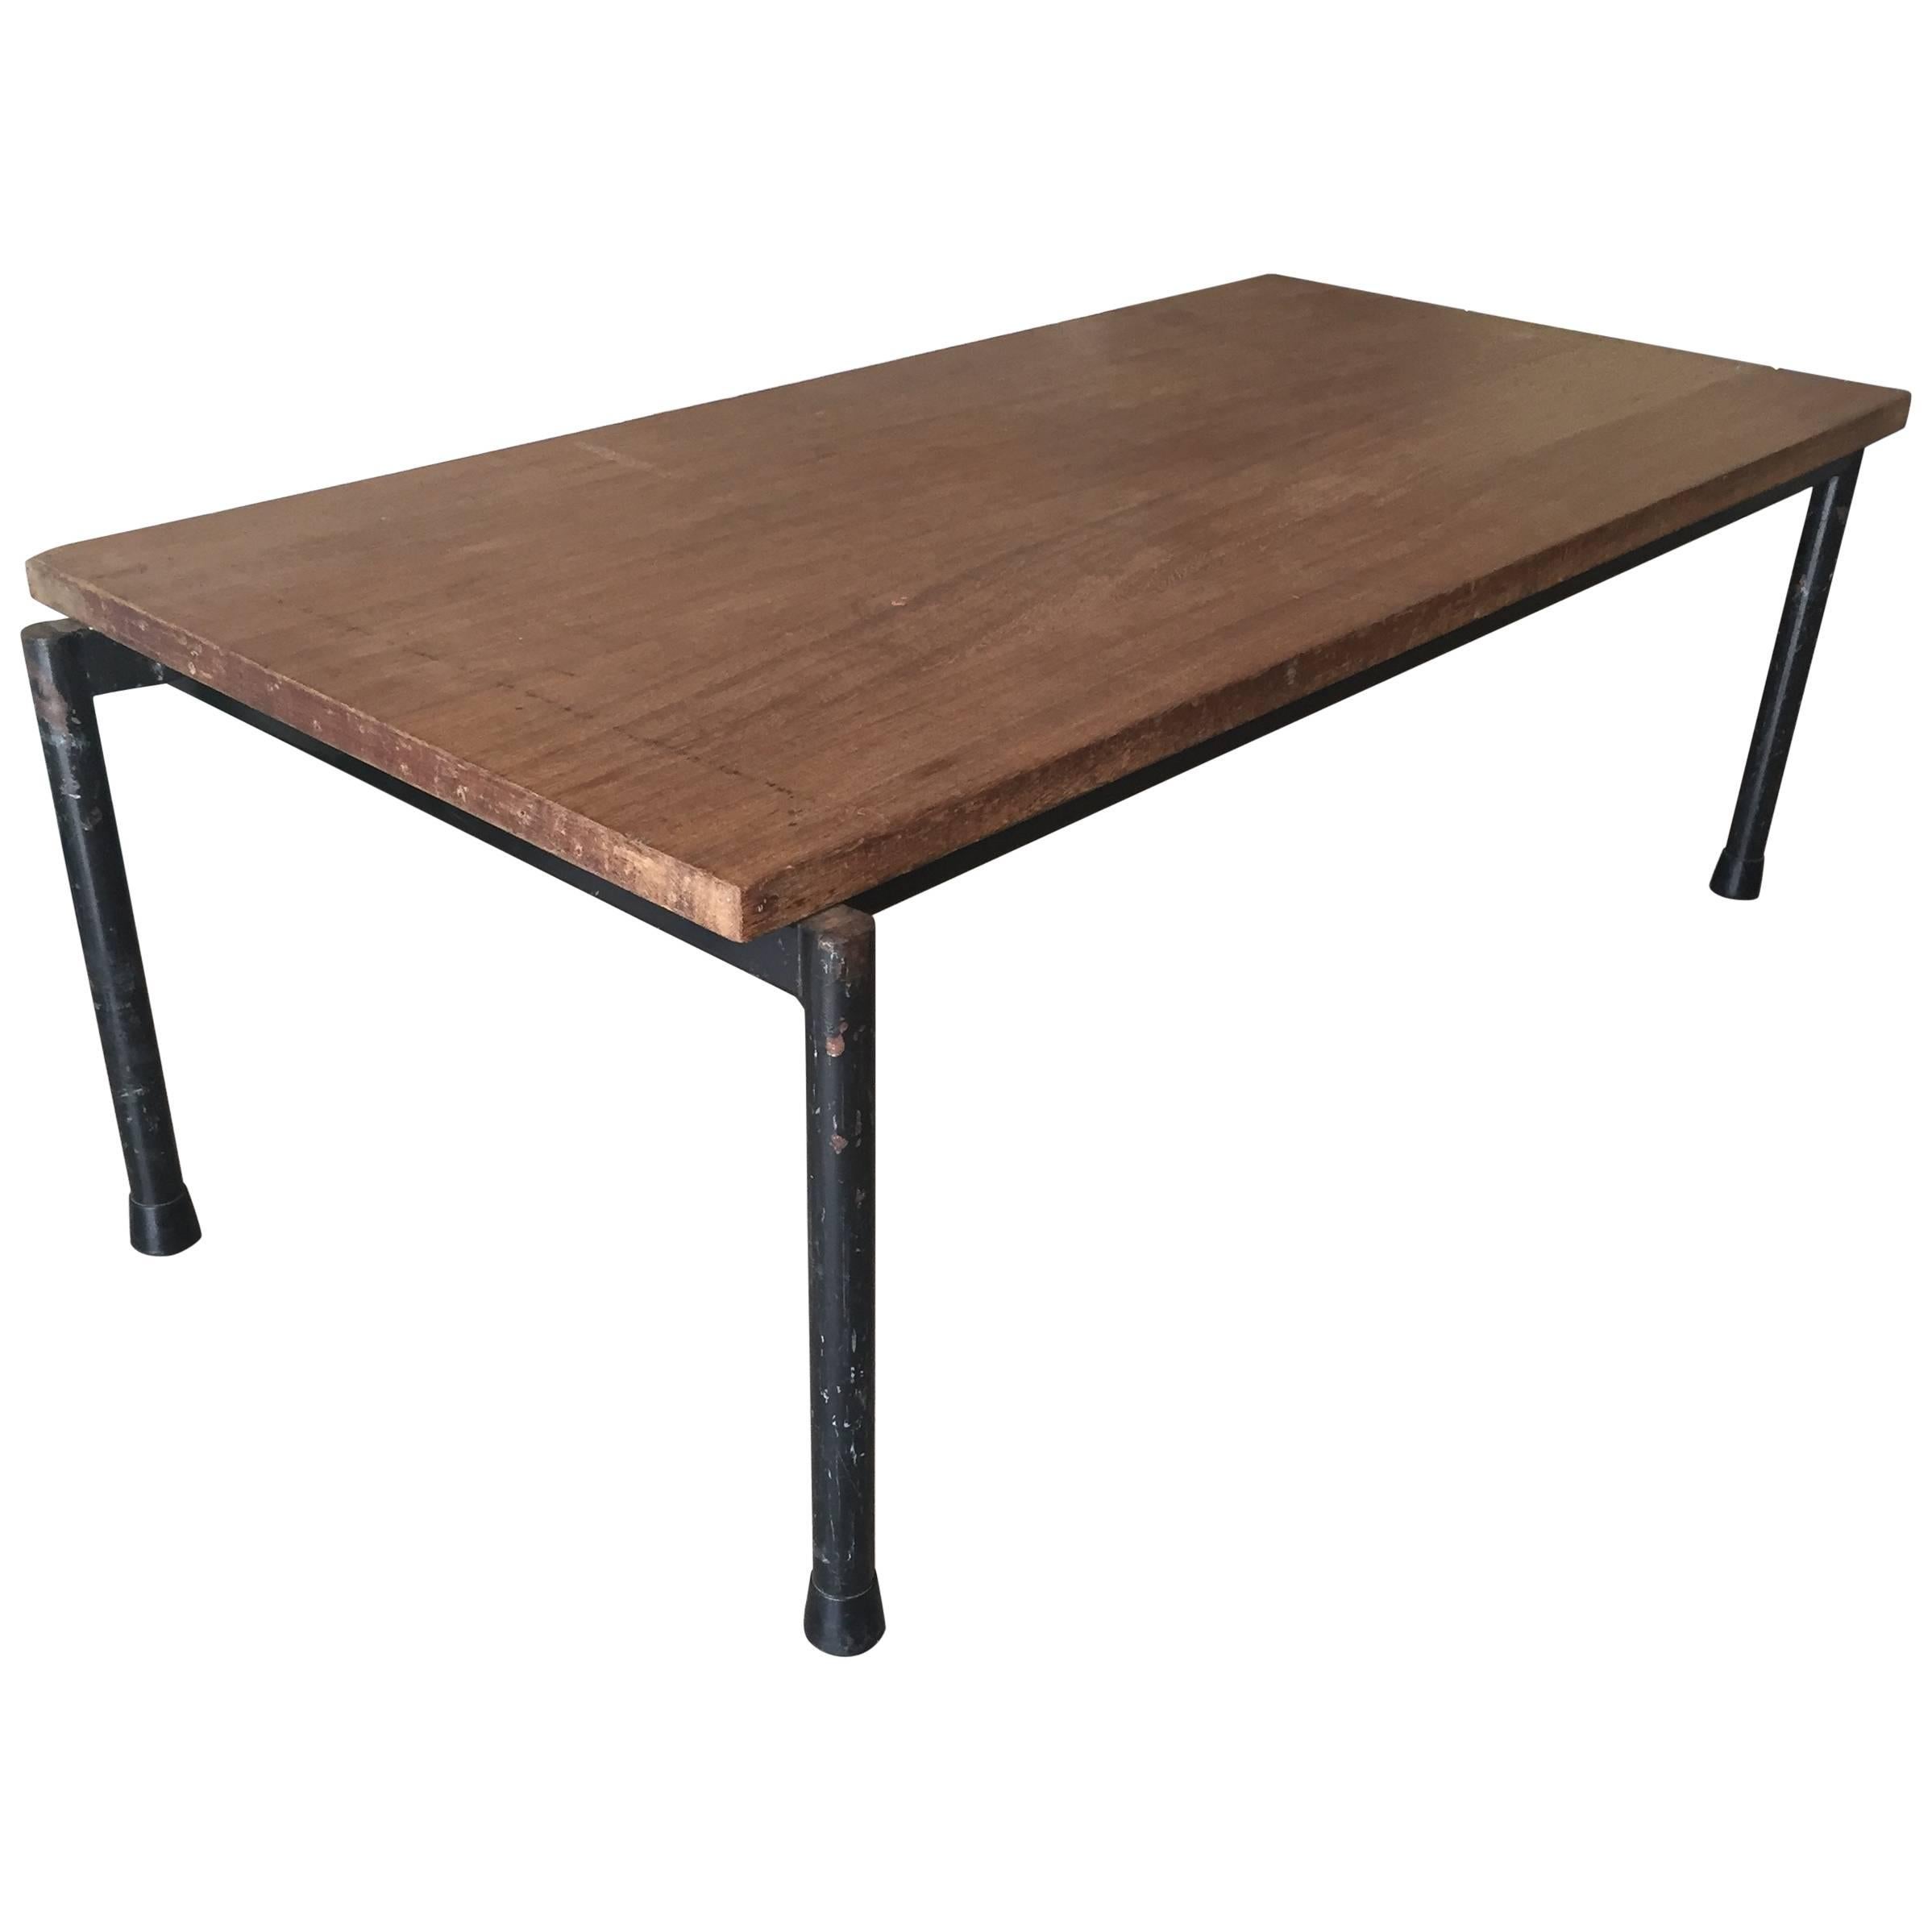 1950s Industrial Coffee Table Blacked Metal and Thick Solid Teak Wood Top